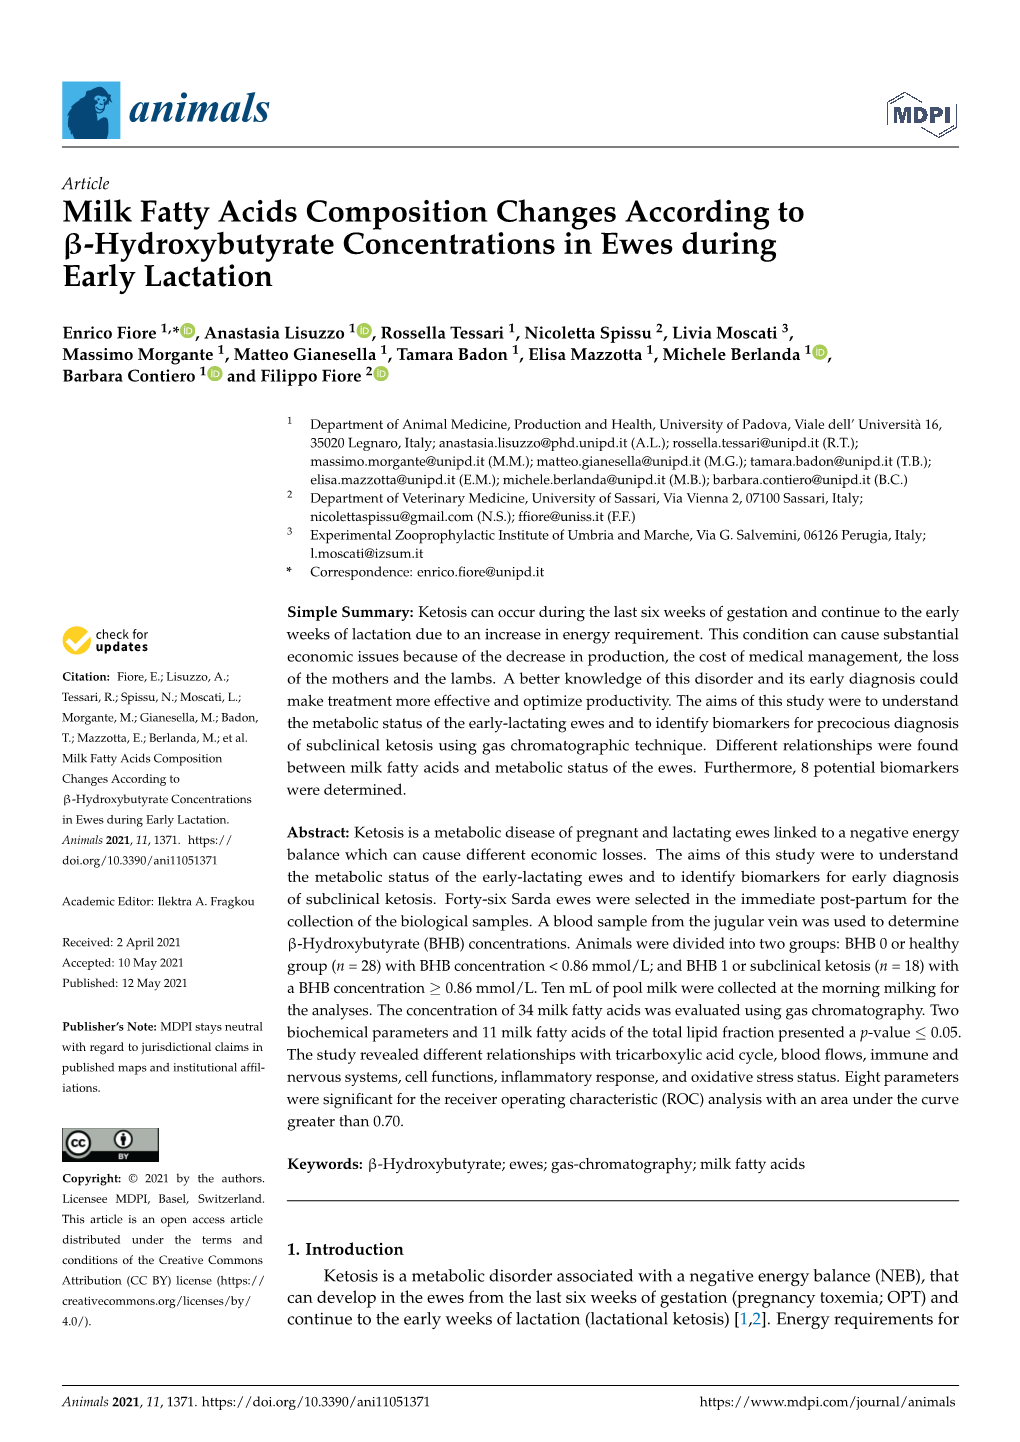 Hydroxybutyrate Concentrations in Ewes During Early Lactation